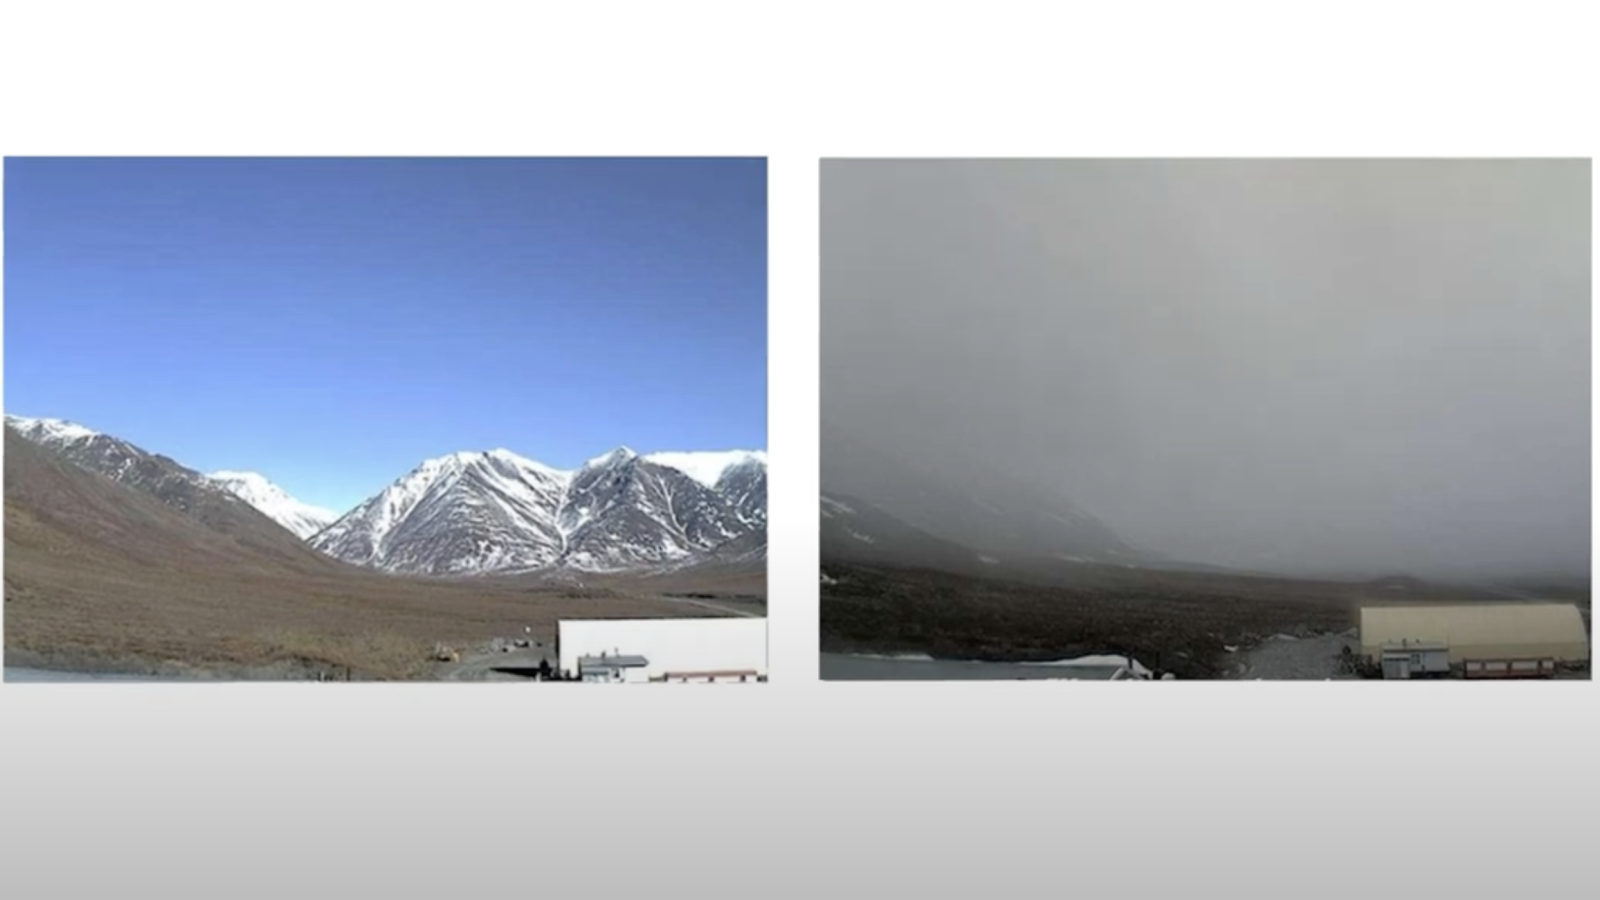 Two photos are shown of the same landscape. The left hand photo shows a clear day, with a mountain in the distance. The right hand side shows a foggy view, with the mountain obscured.